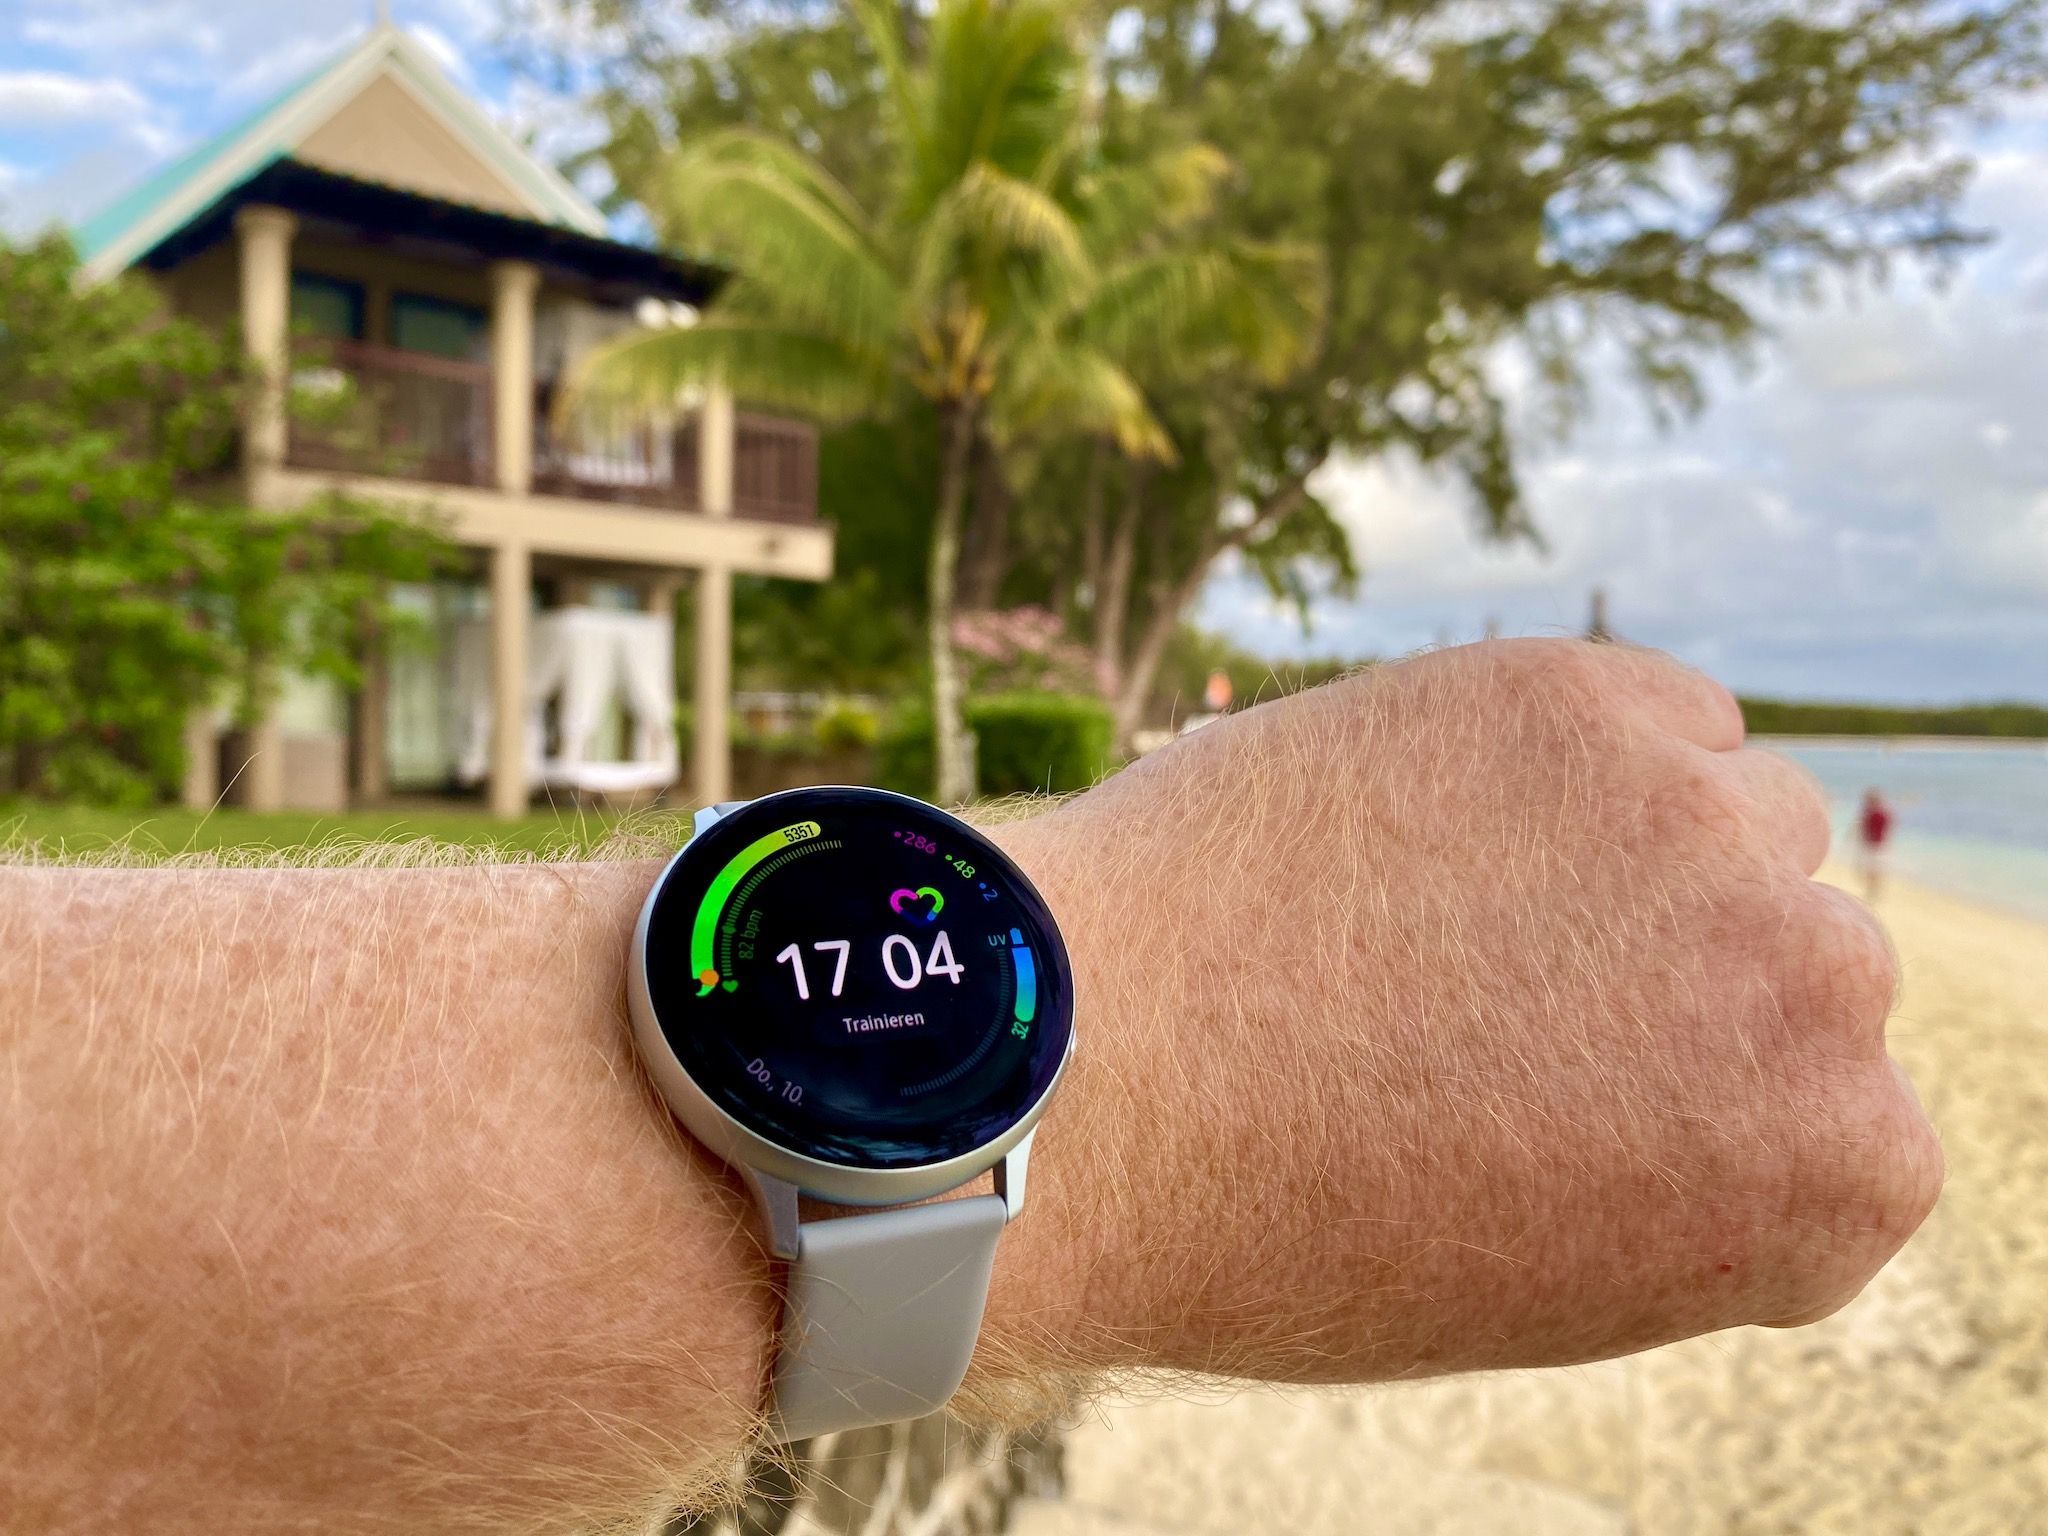 Samsung Galaxy Watch Active 2 tested elegant athlete for active